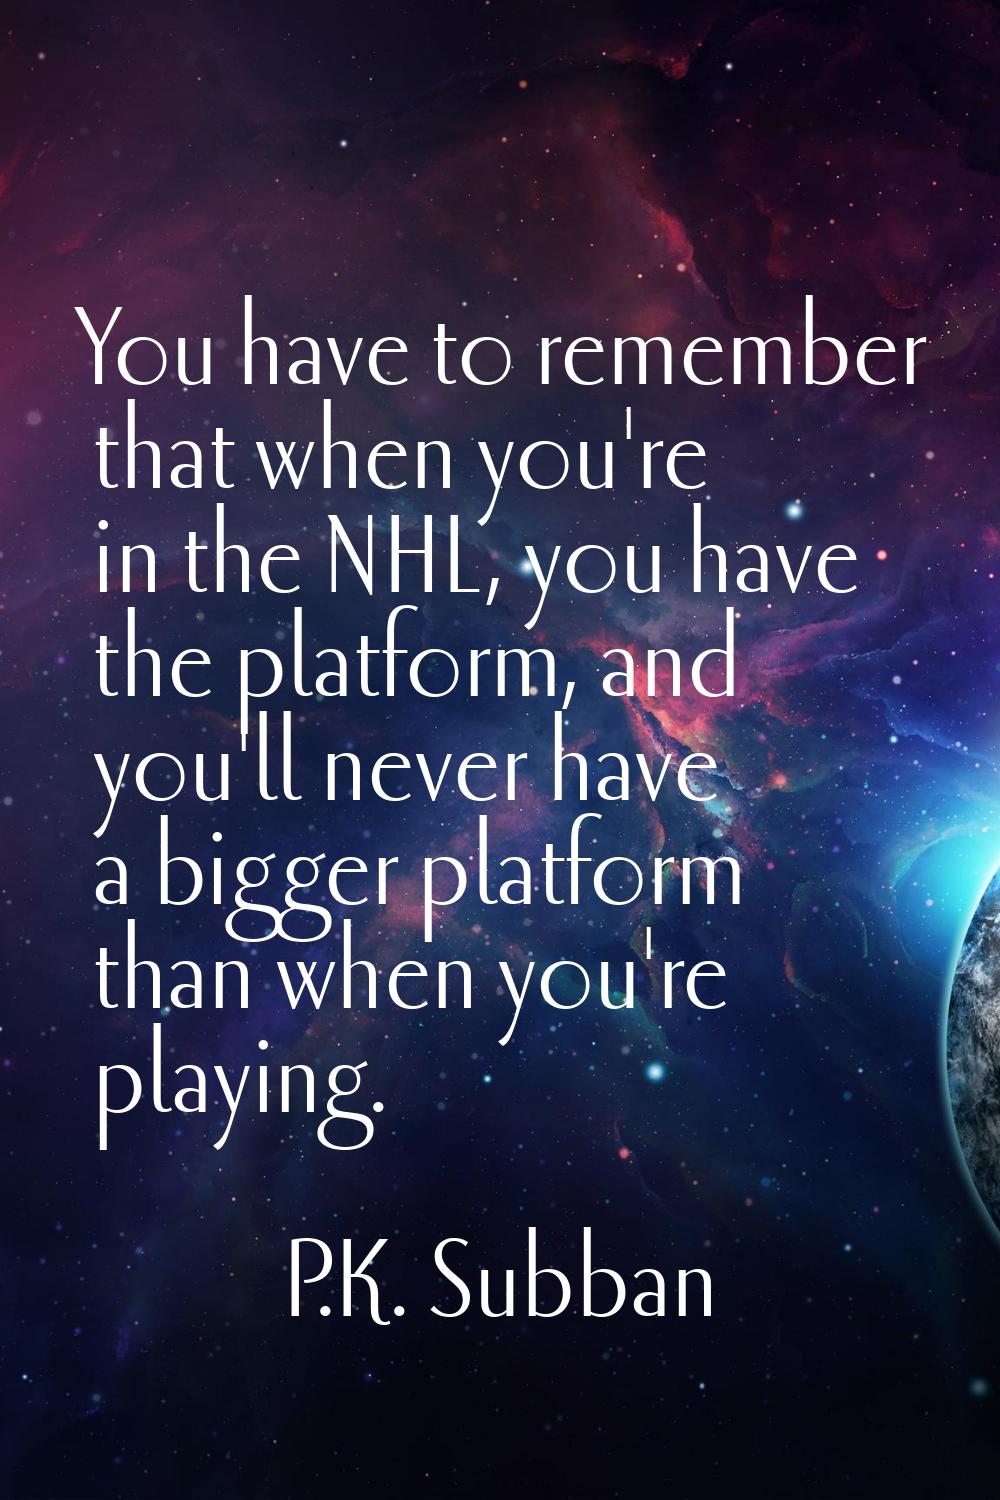 You have to remember that when you're in the NHL, you have the platform, and you'll never have a bi